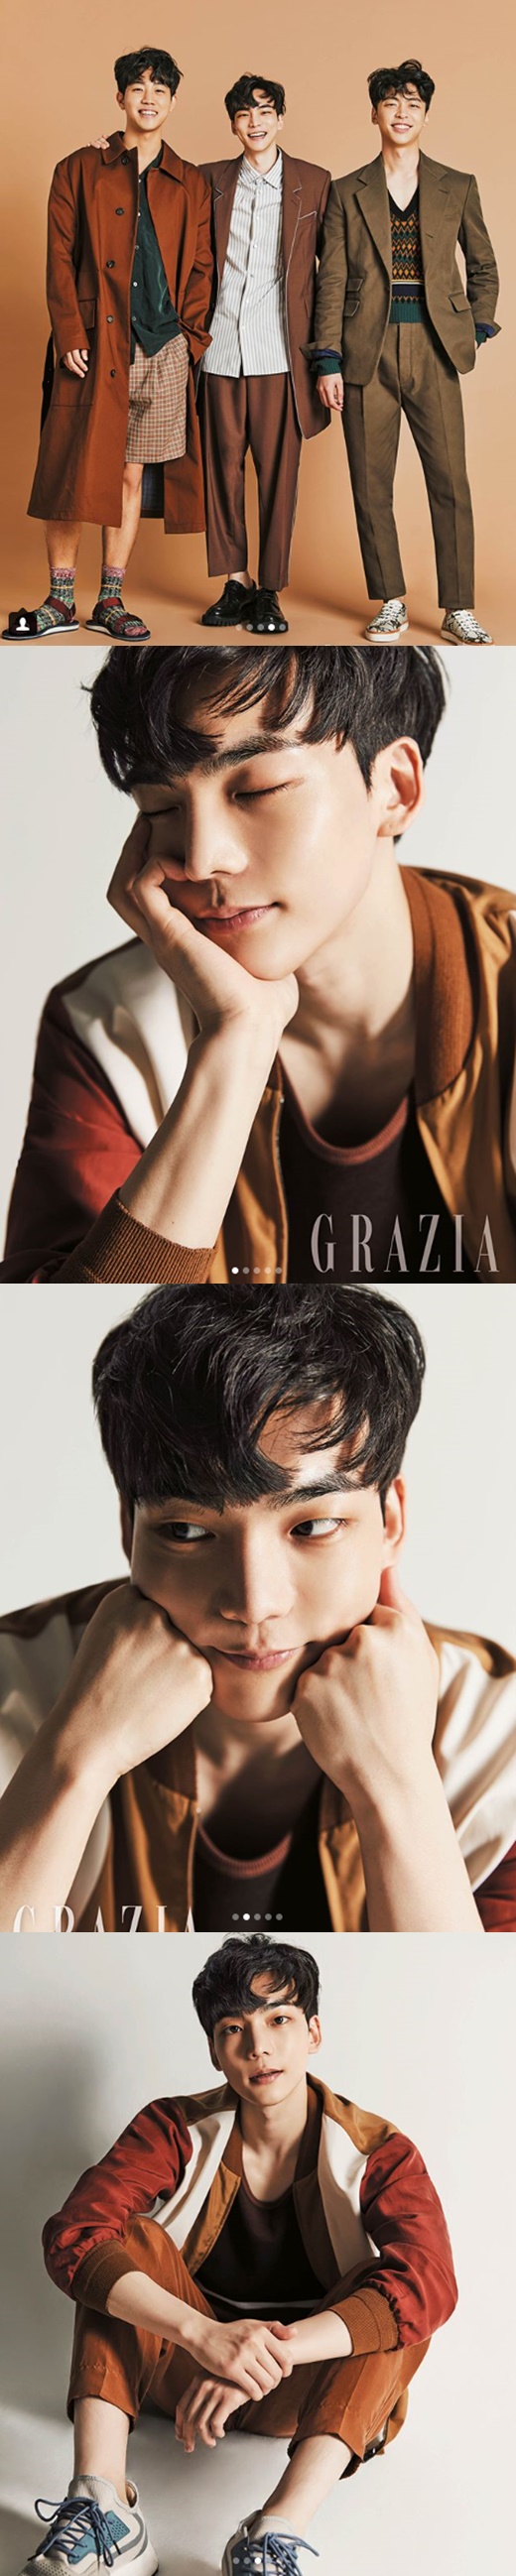 Jae Ho, Lee Kyu Bin and Kim Do Kyun from Heart Signal boasted Handsome boy chemistry.Jae Ho released a recent fashion magazine Grazia picture cut on his instagram on the 2nd.The photo showed Lee Kyu Bin and Kim Do Kyun with Jae Ho.The group, who were in the photo shoot with a warm visual, boasted the same shape as the model, and attracted attention. The soft smiles of the three men stood out and stole the hearts of the viewers.Jae Ho said, I was unfamiliar but I was so happy to be together. Thank you for making good memories.Jae Ho, Lee Kyu Bin, and Kim Do Kyun are getting hot attention from netizens even after the end of Channel A Heart Signal.